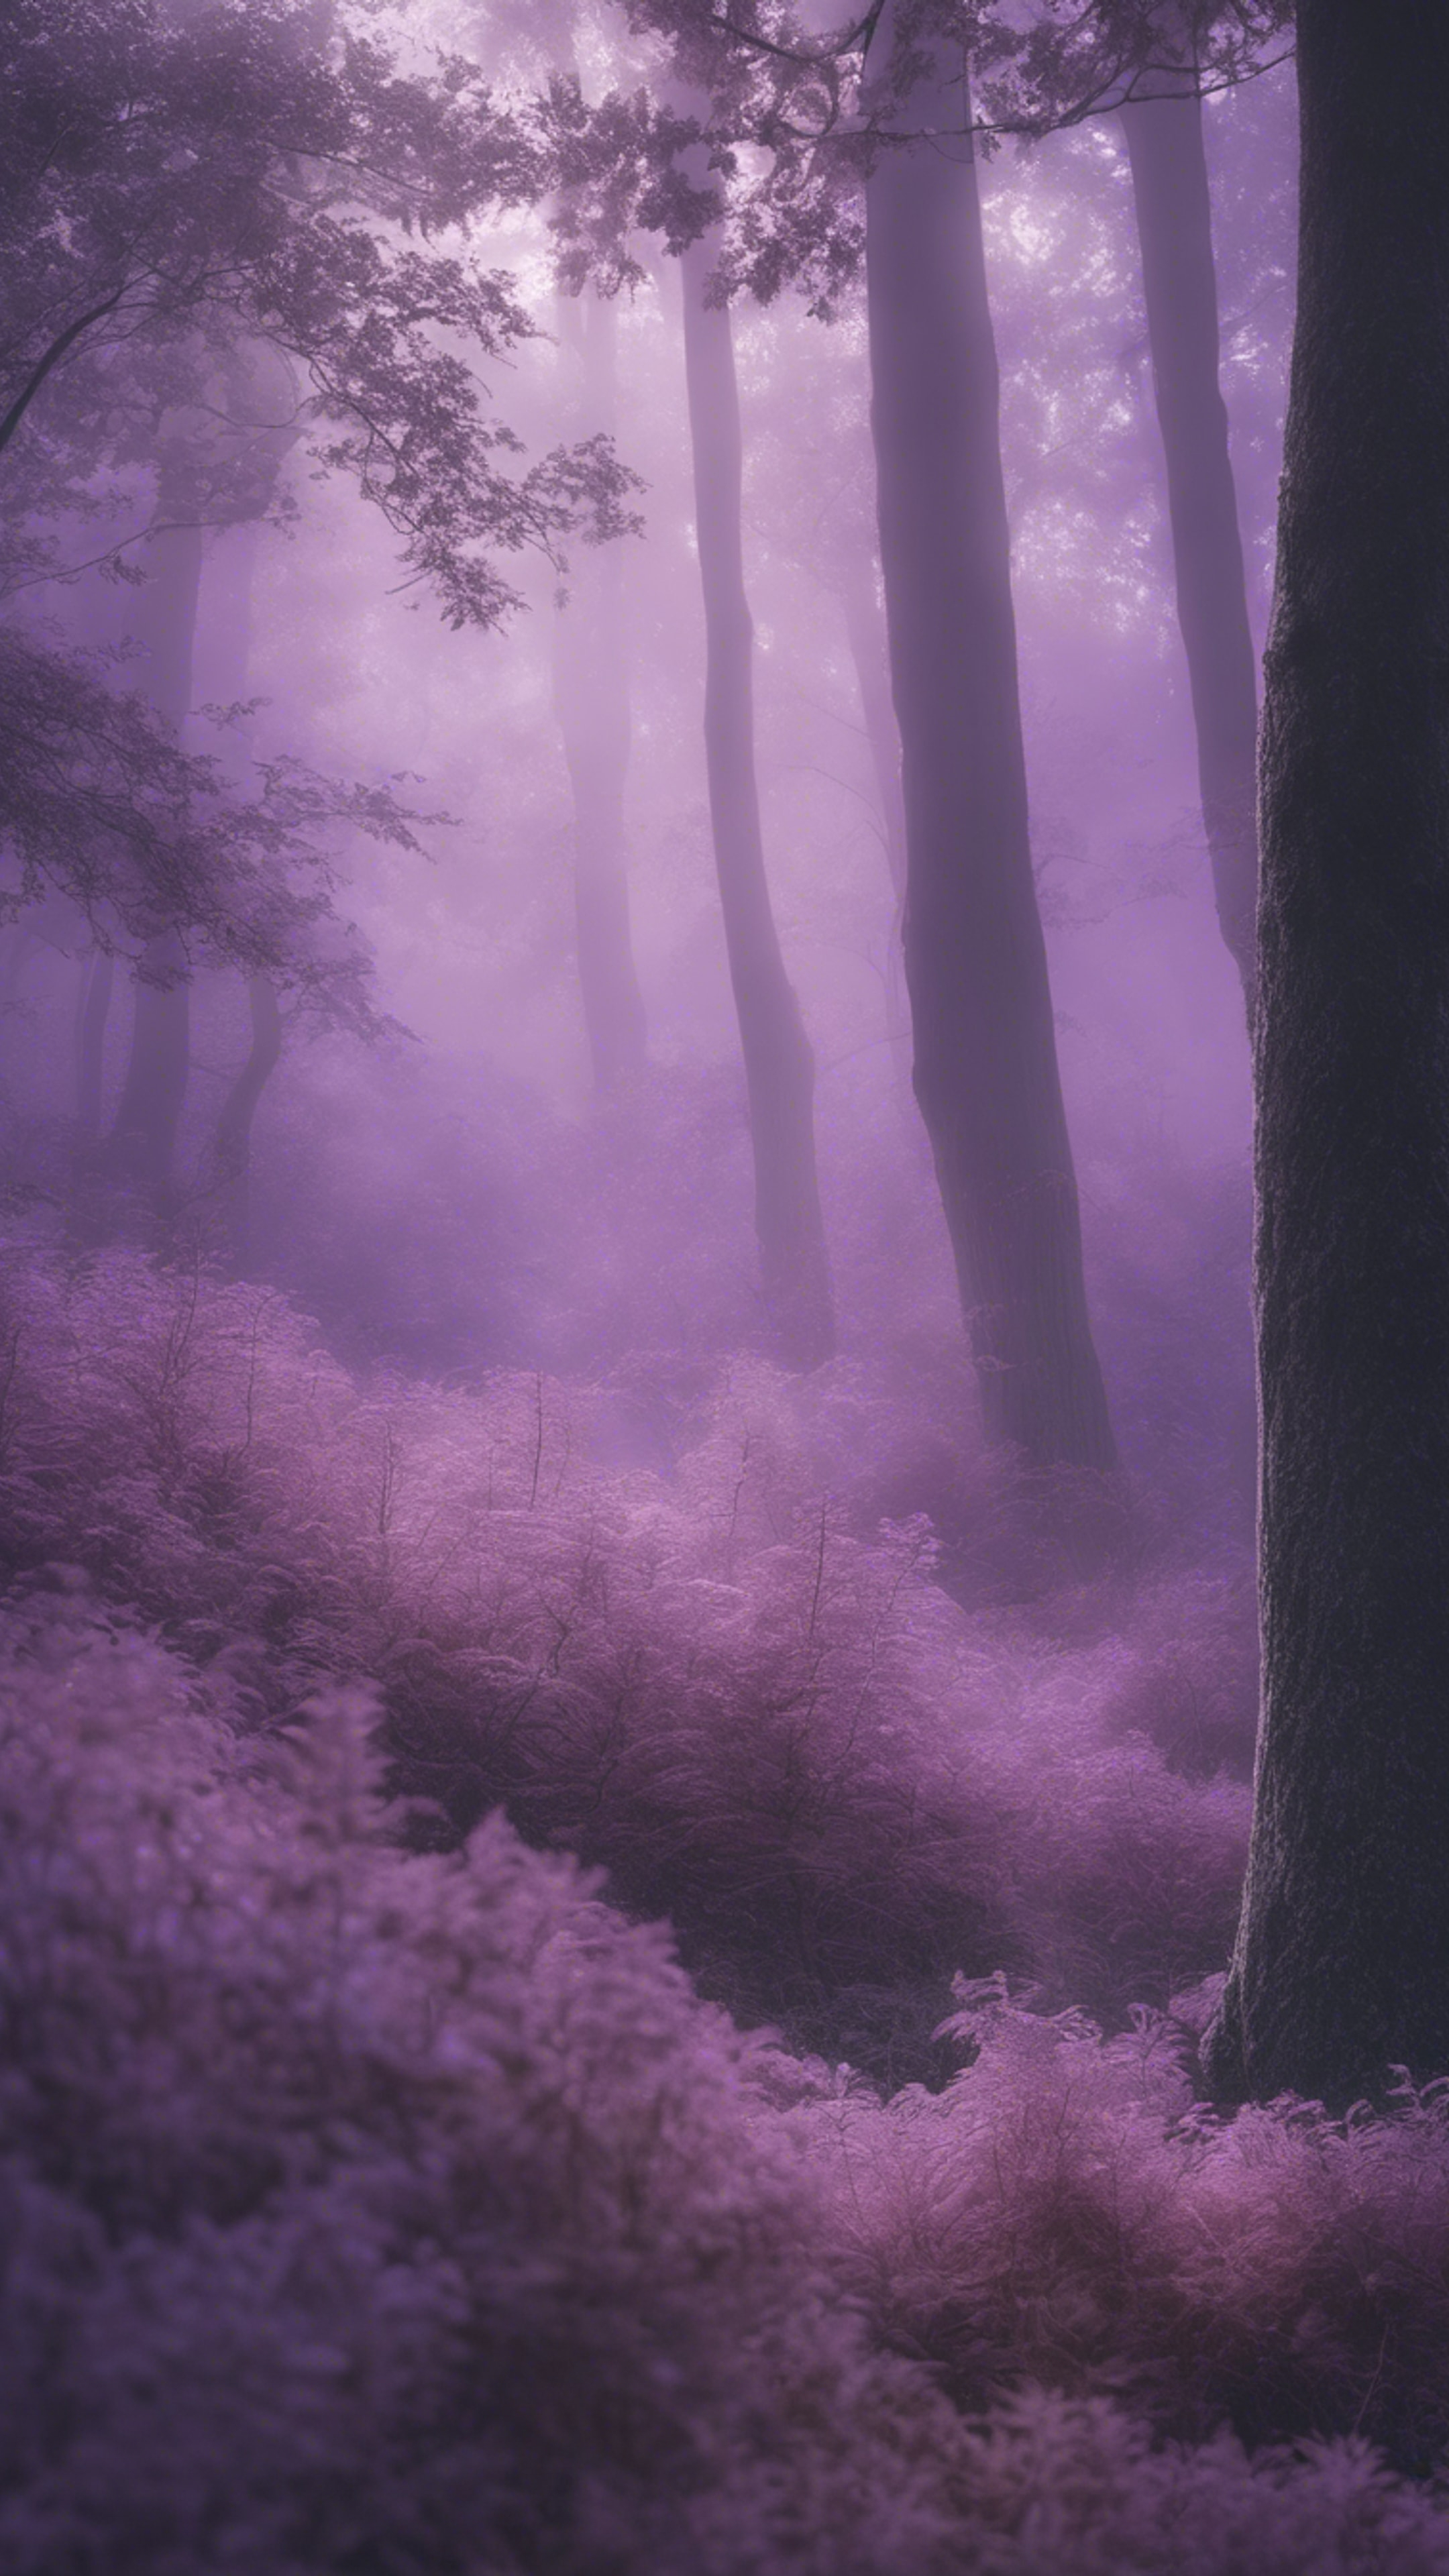 Ethereal scene of a tranquil forest bowed under a silky layer of light purple fog.壁紙[581b7126aa2a4d368dd8]